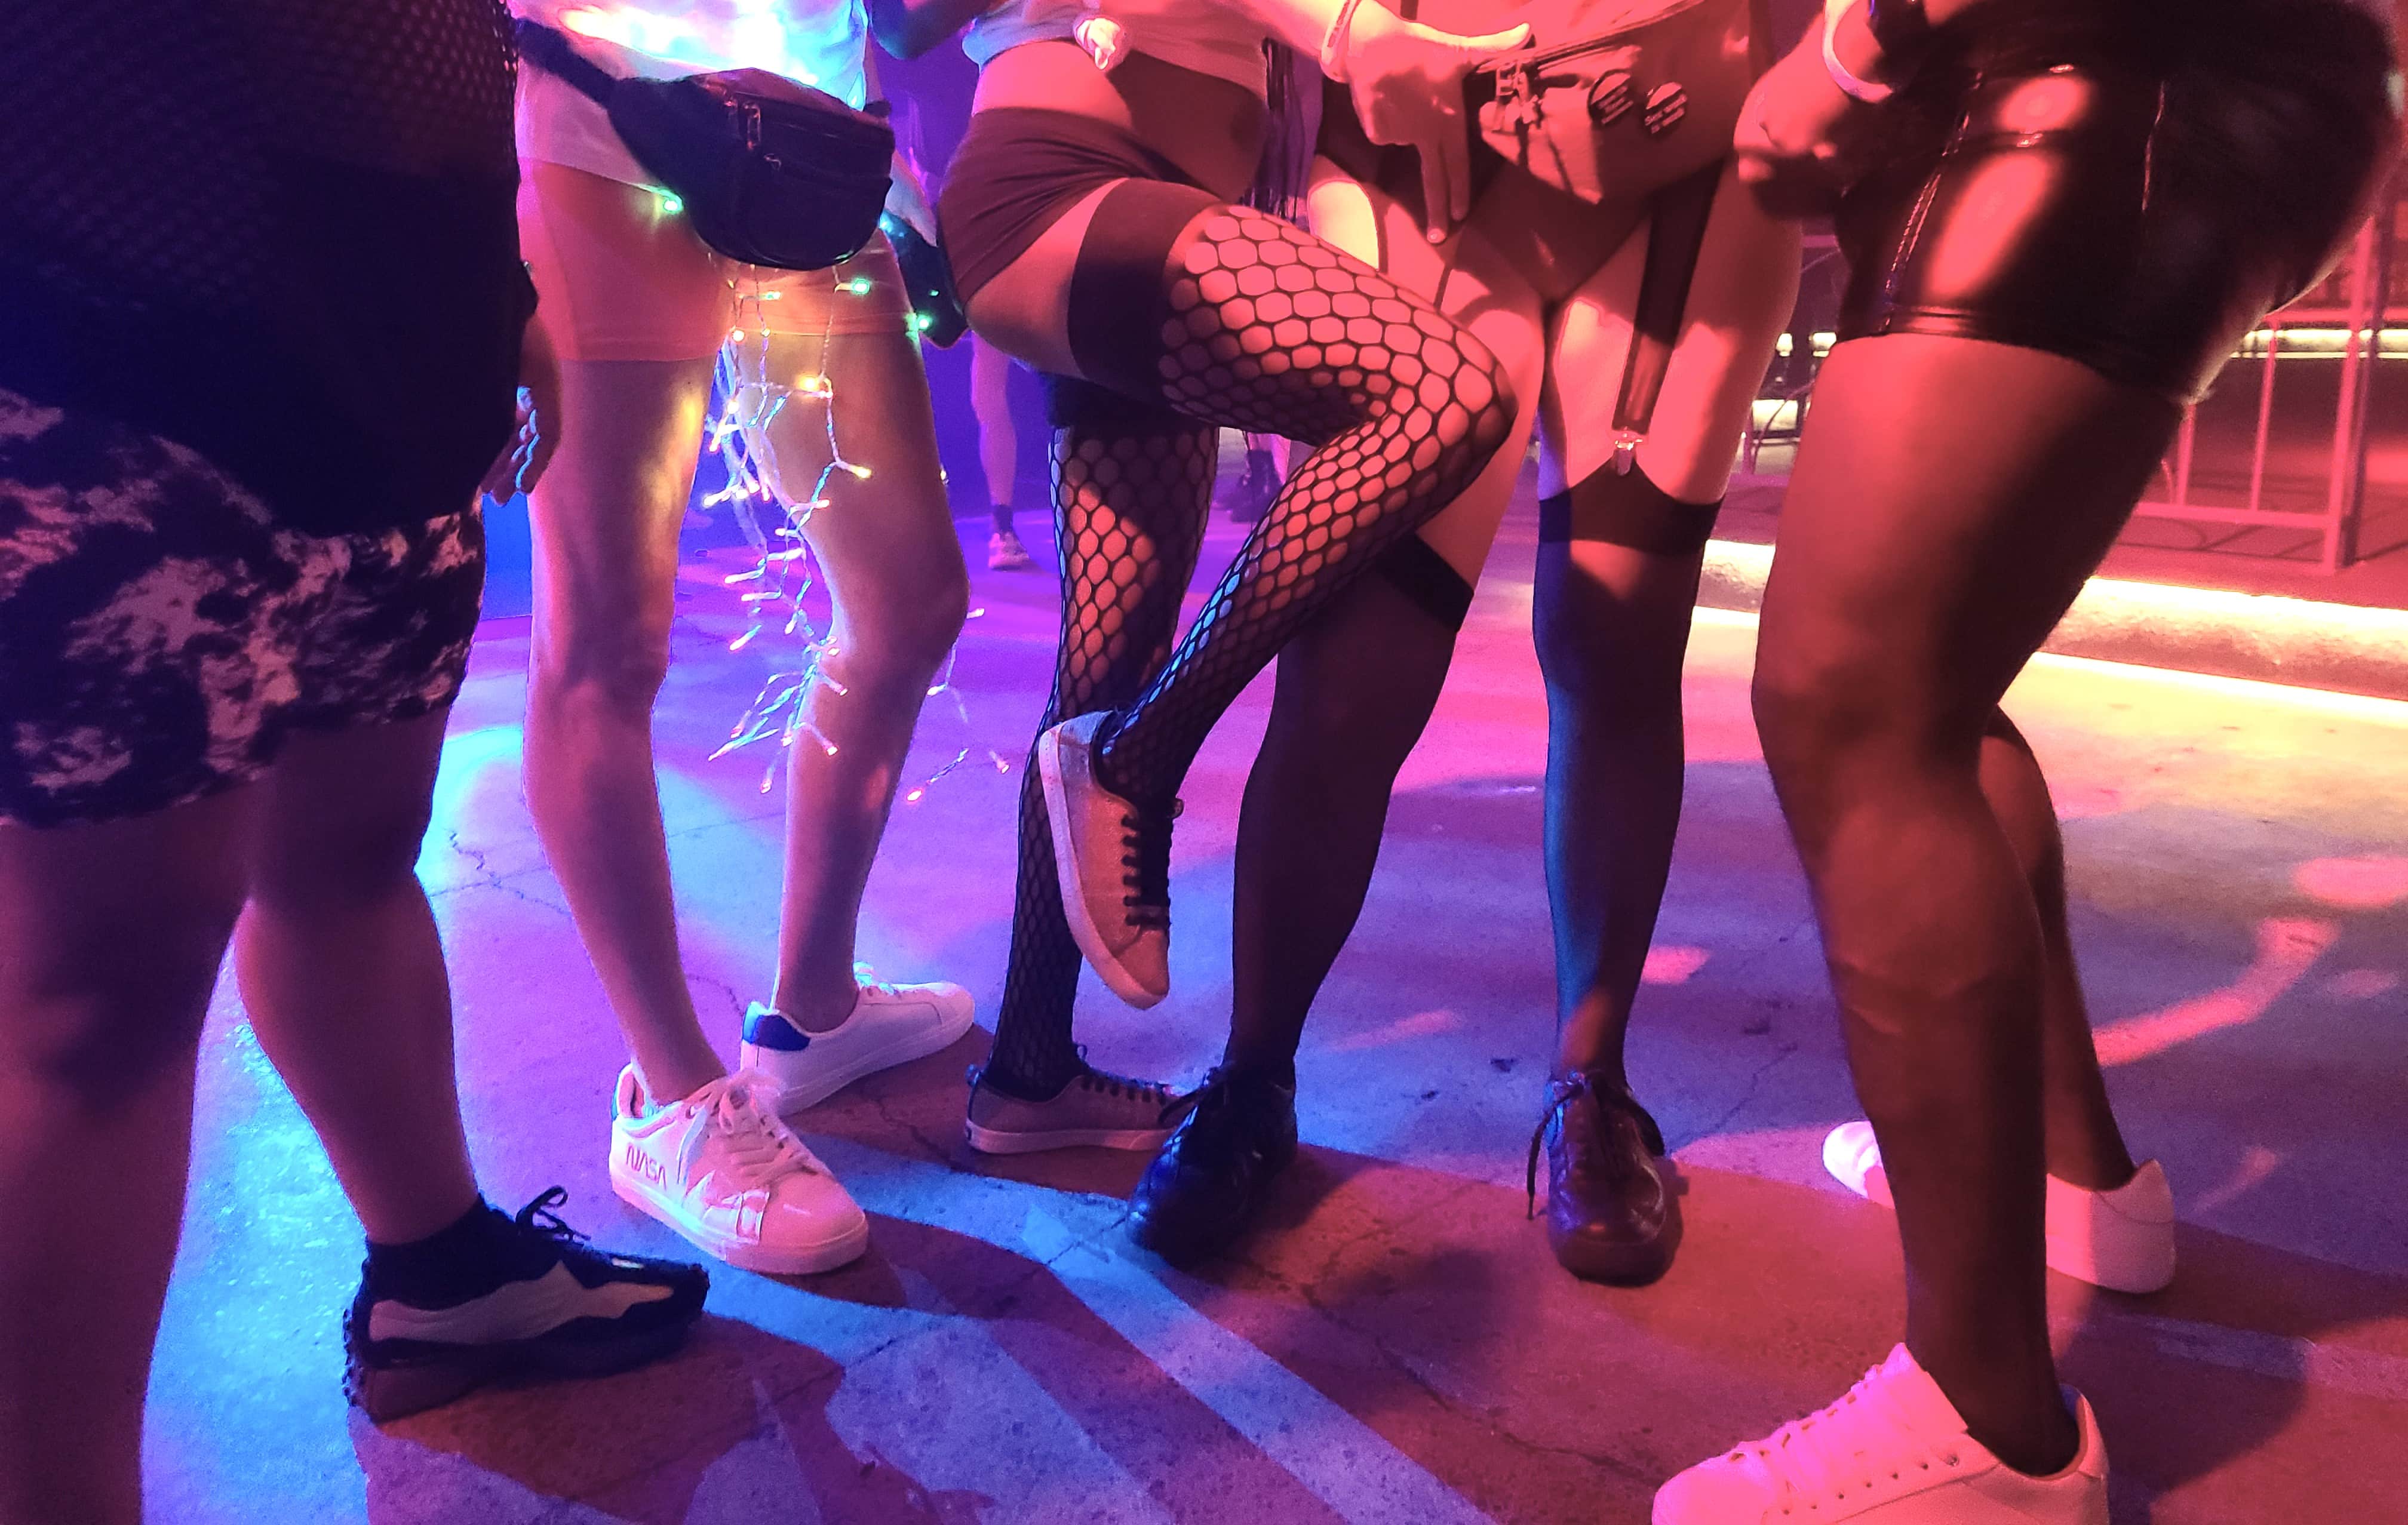 The AIDS2022 ‘No Pants No Problem’ Party Lived Up to its Name